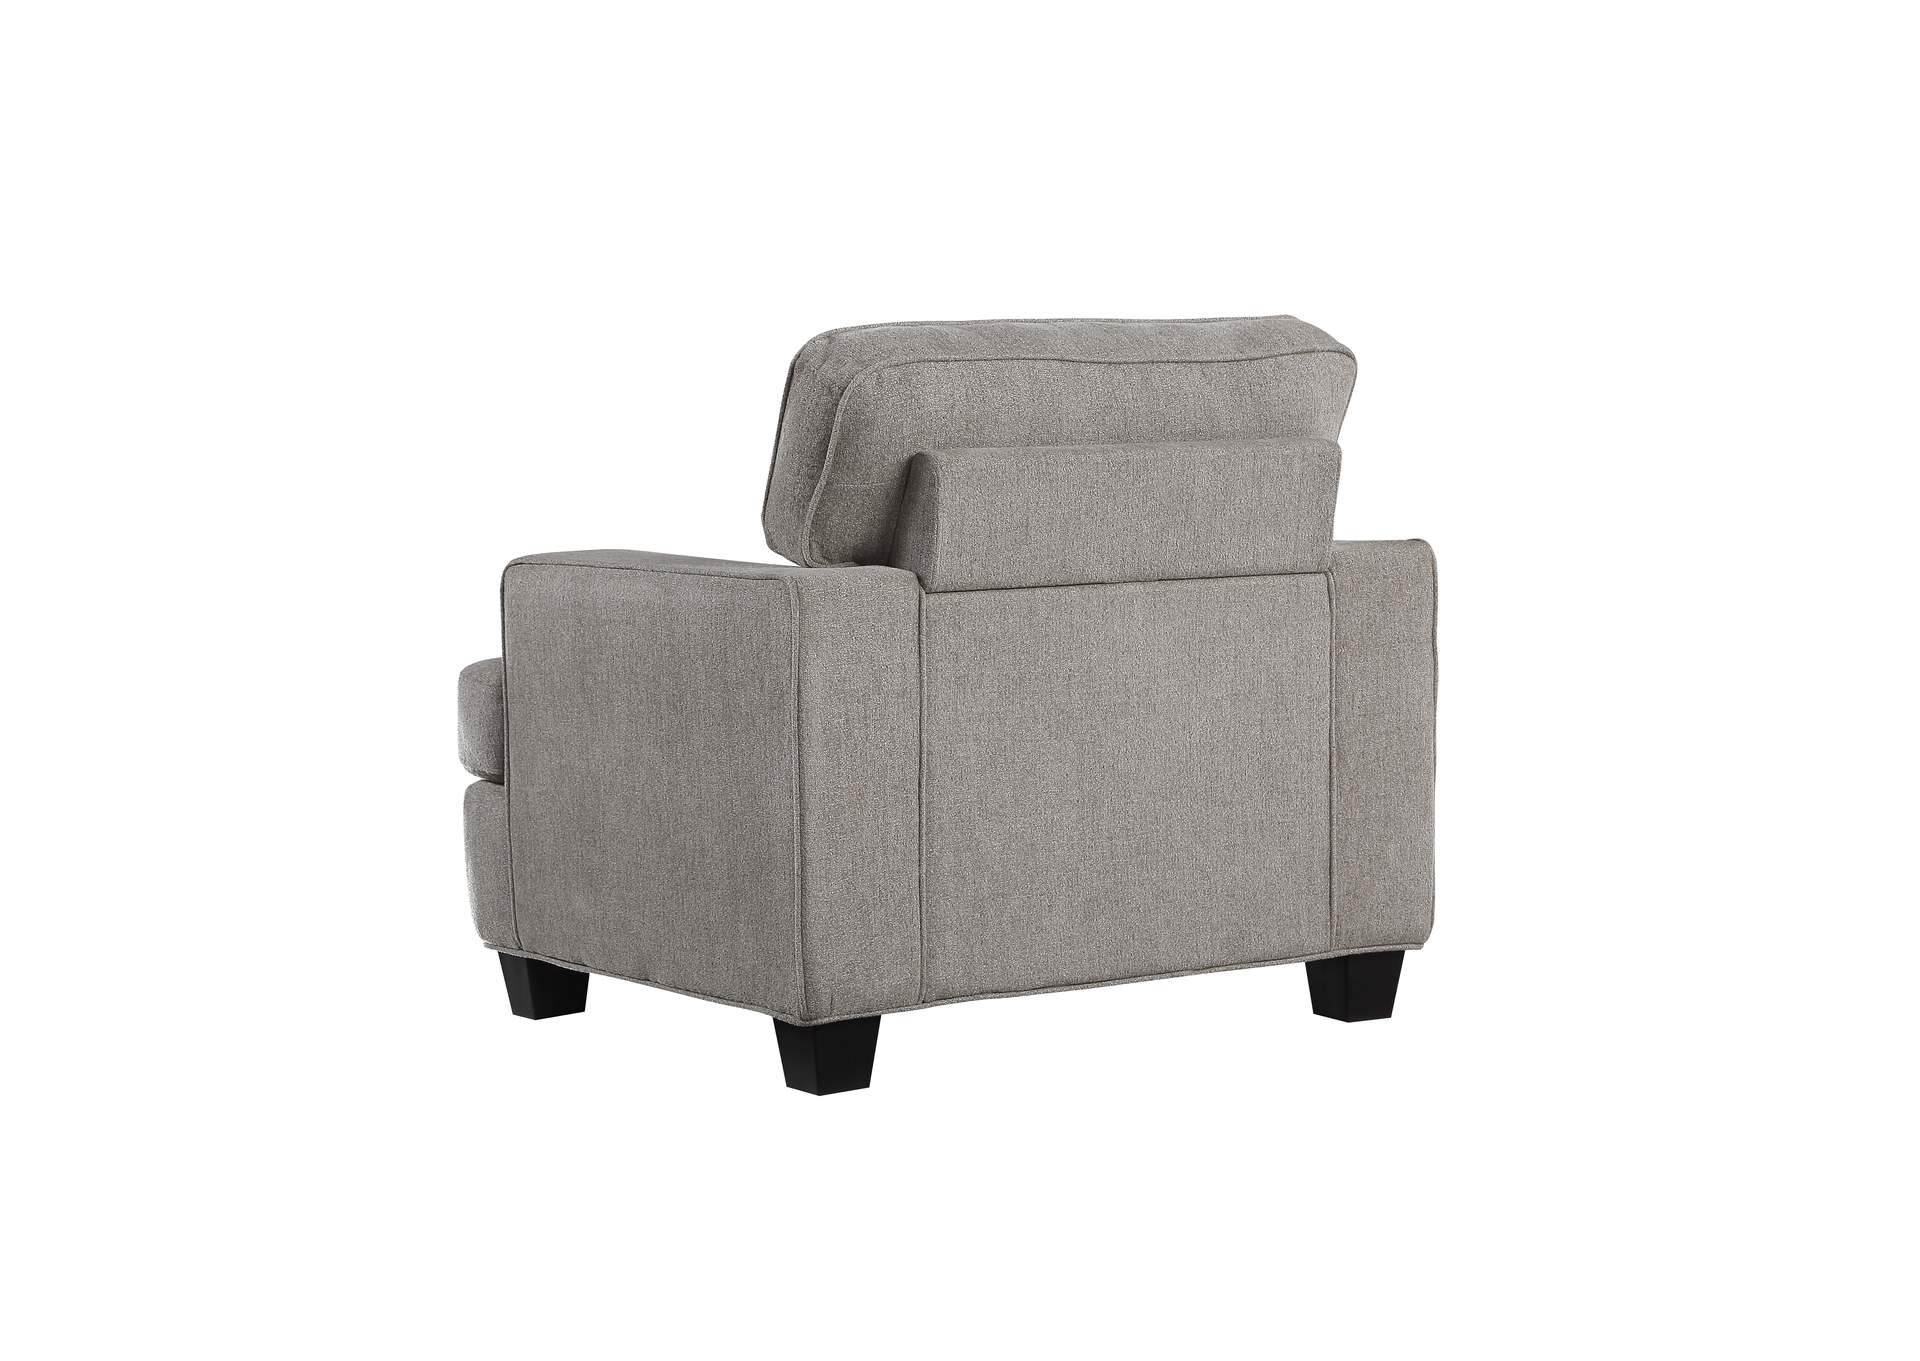 Carter Accent Chair,Emerald Home Furnishings